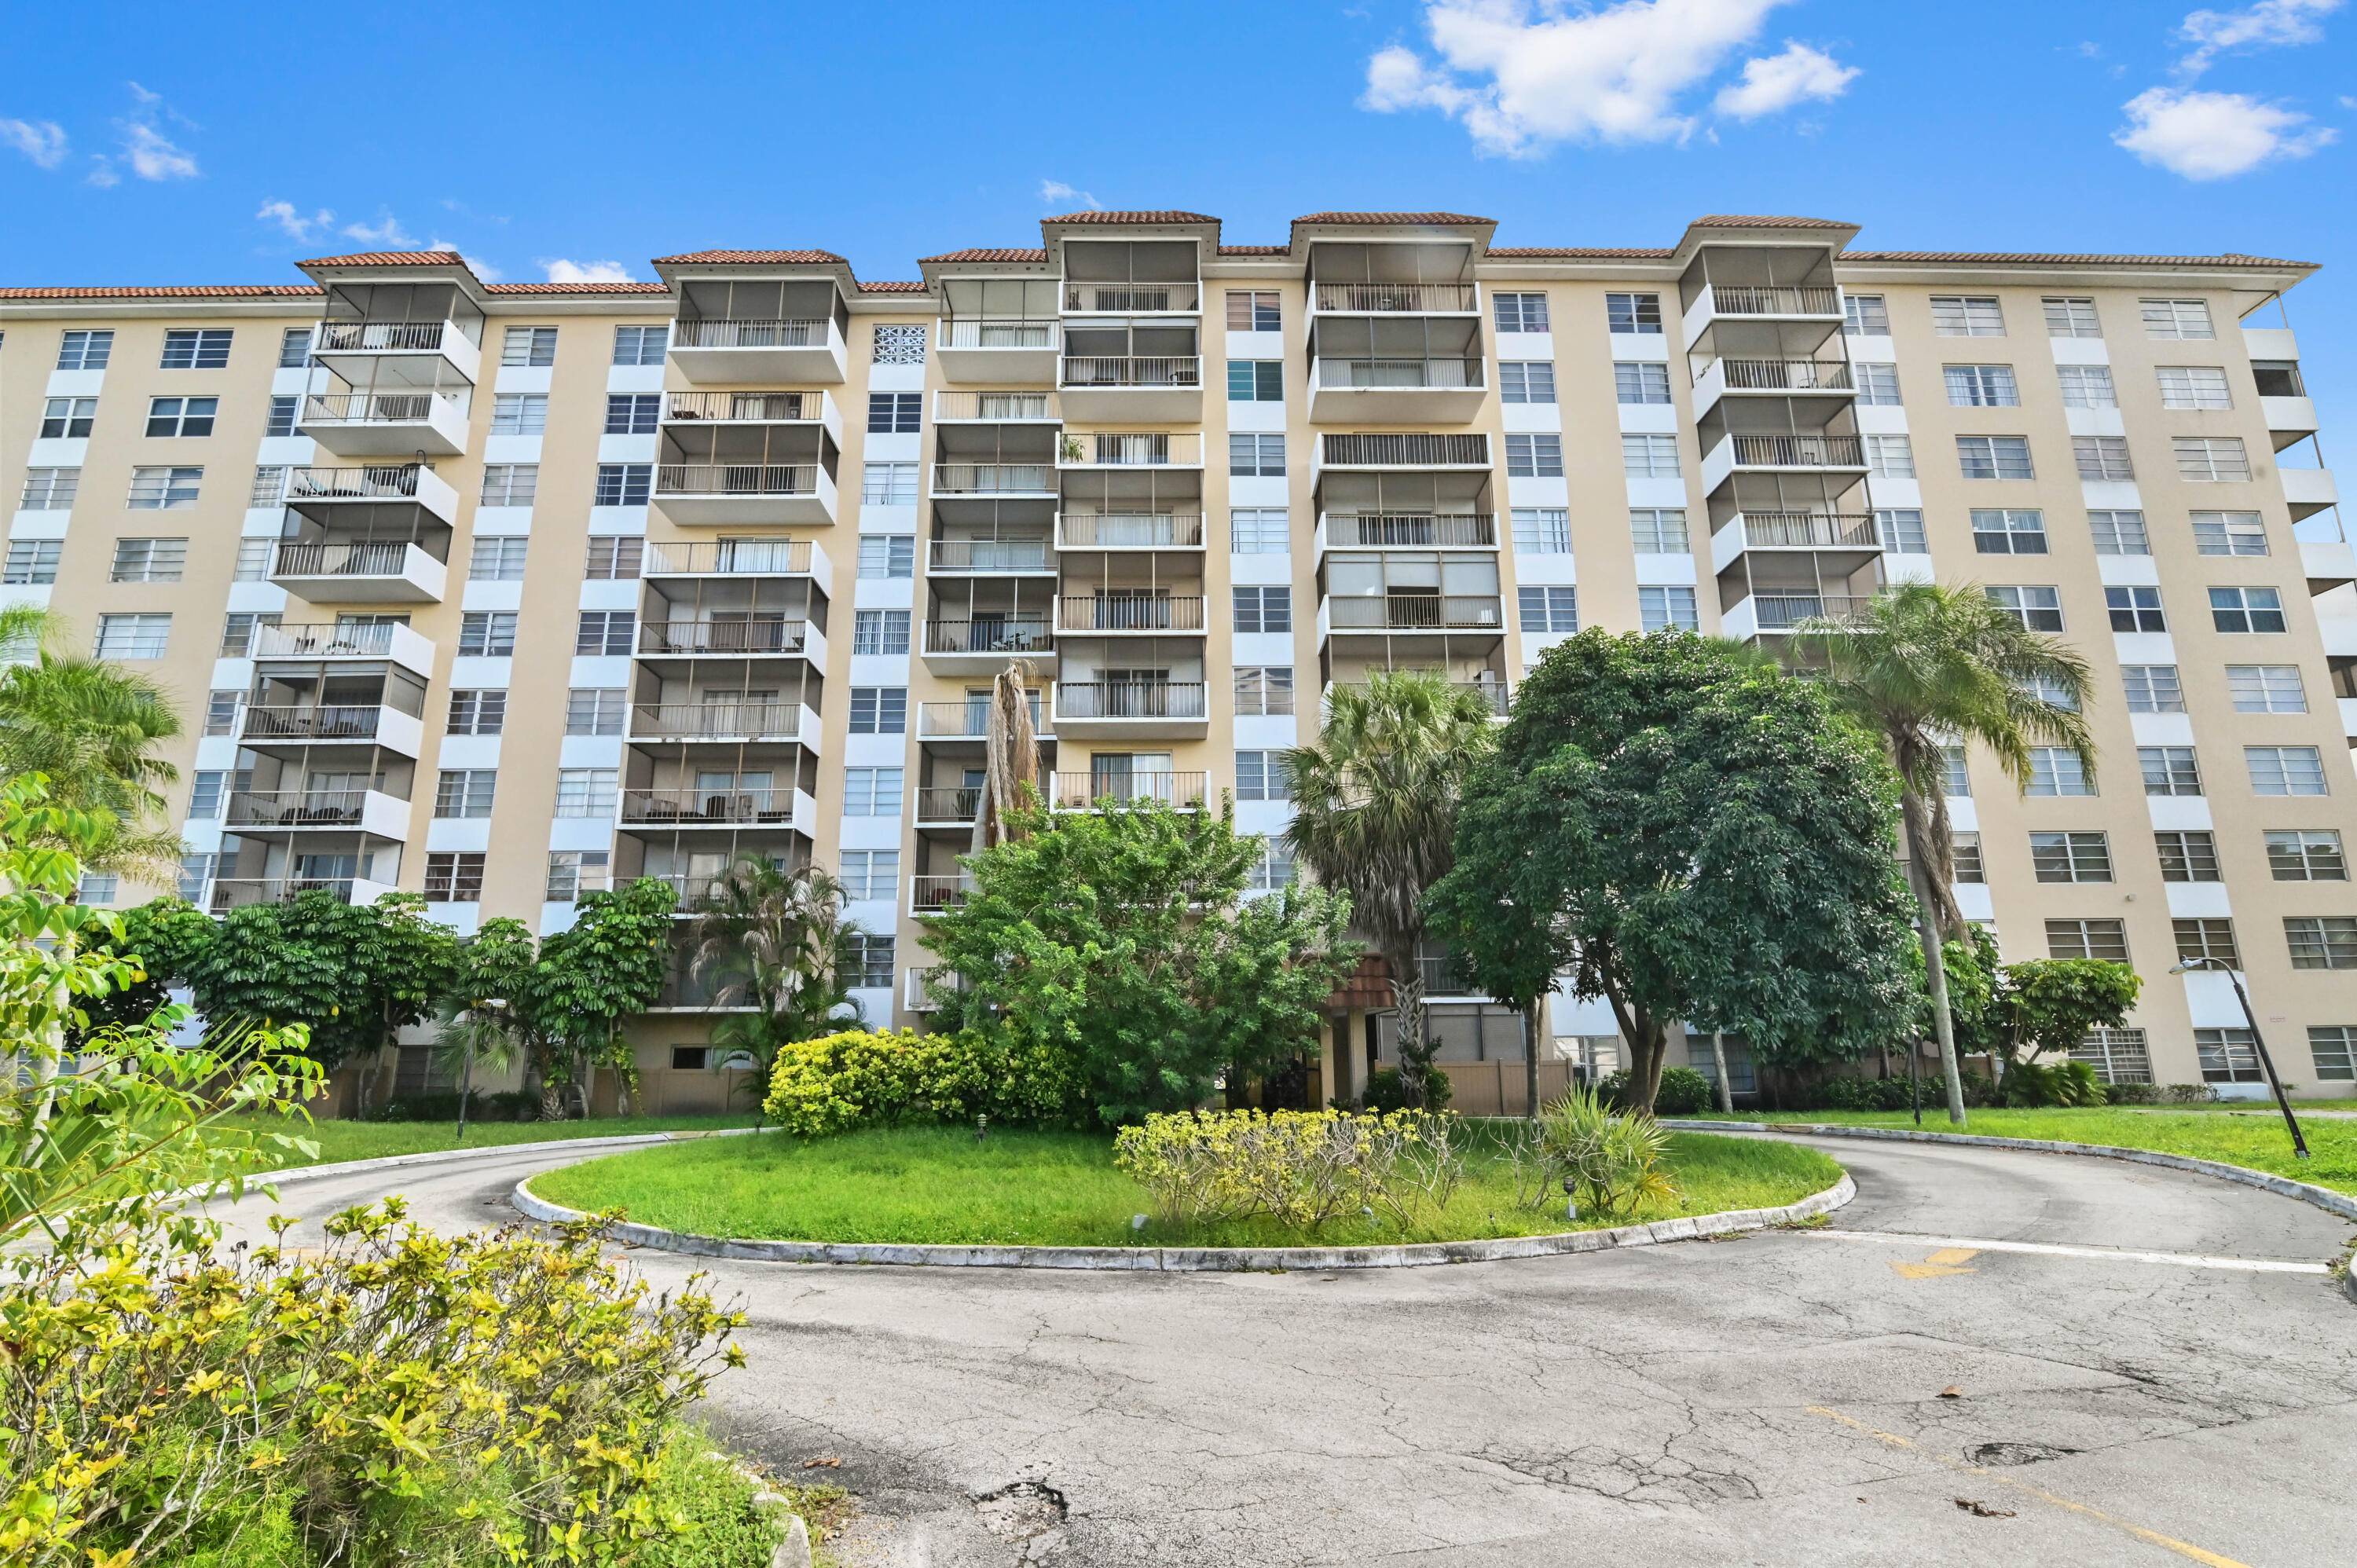 Beautiful 1 bedroom 1 bathroom condo with in unit washer and dryer located in Lauderhill gated community with 24 7 security.